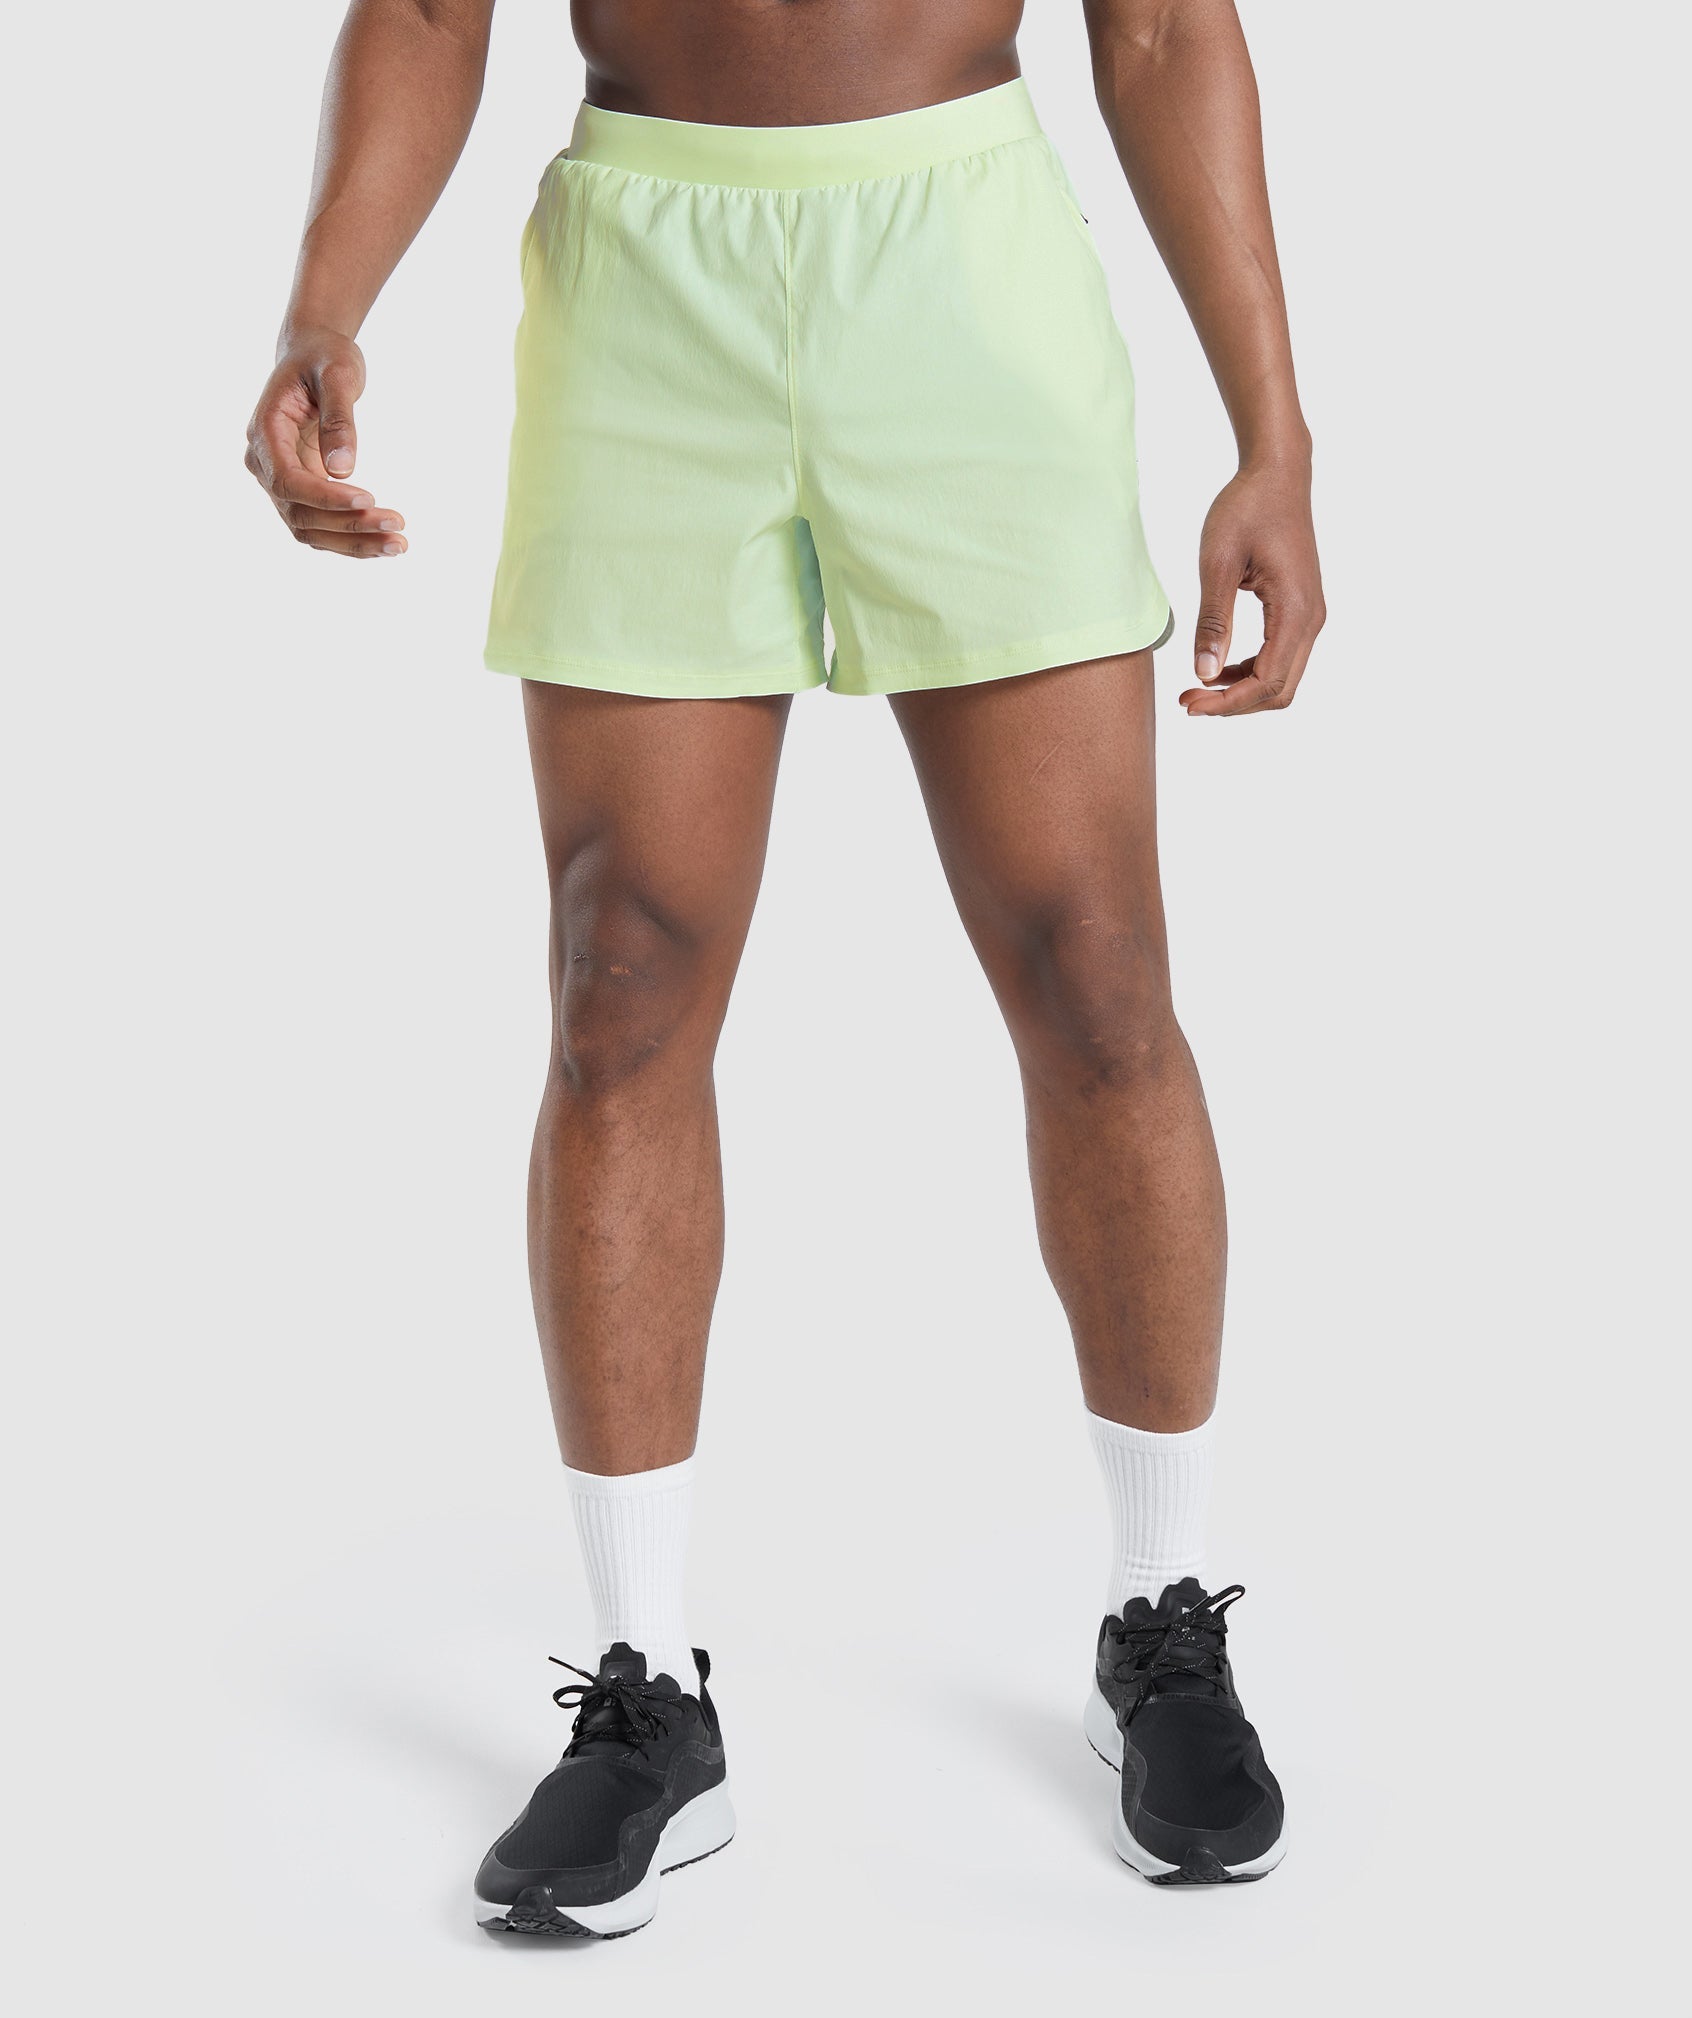 Speed Evolve 5" Shorts in Cucumber Green - view 1